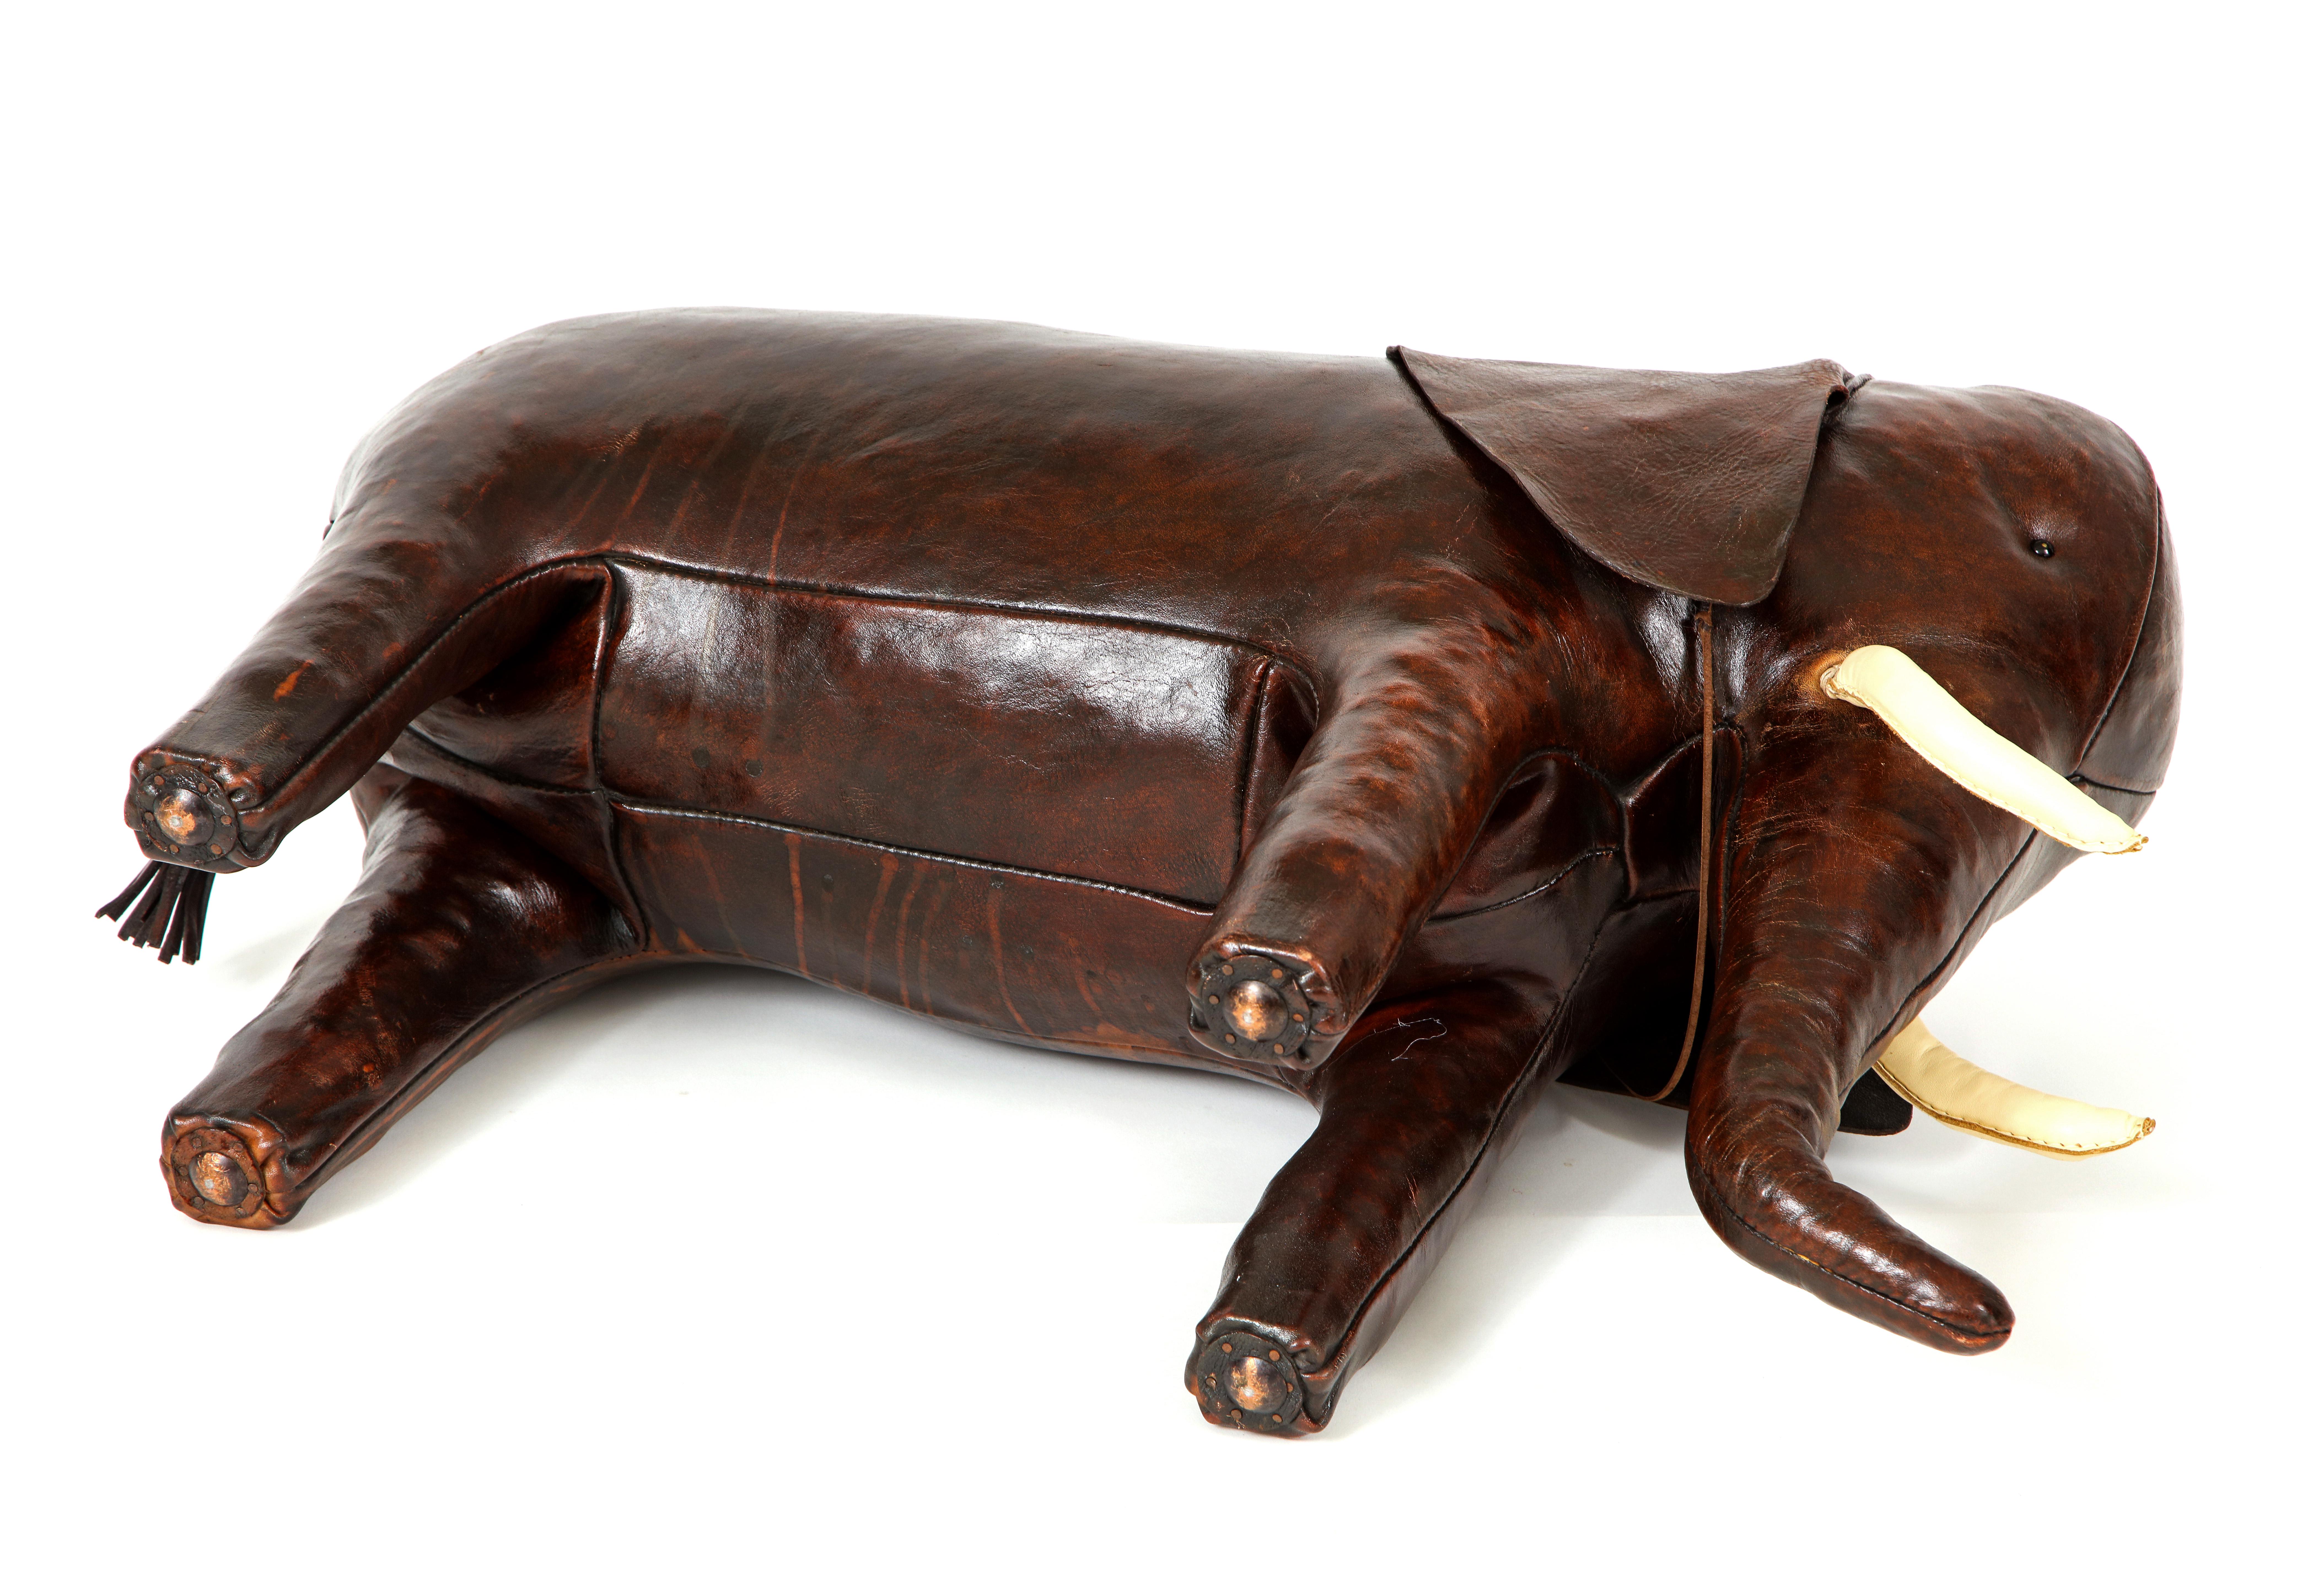 British Abercrombie & Fitch Elephant Footstool by Dimitri Omersa